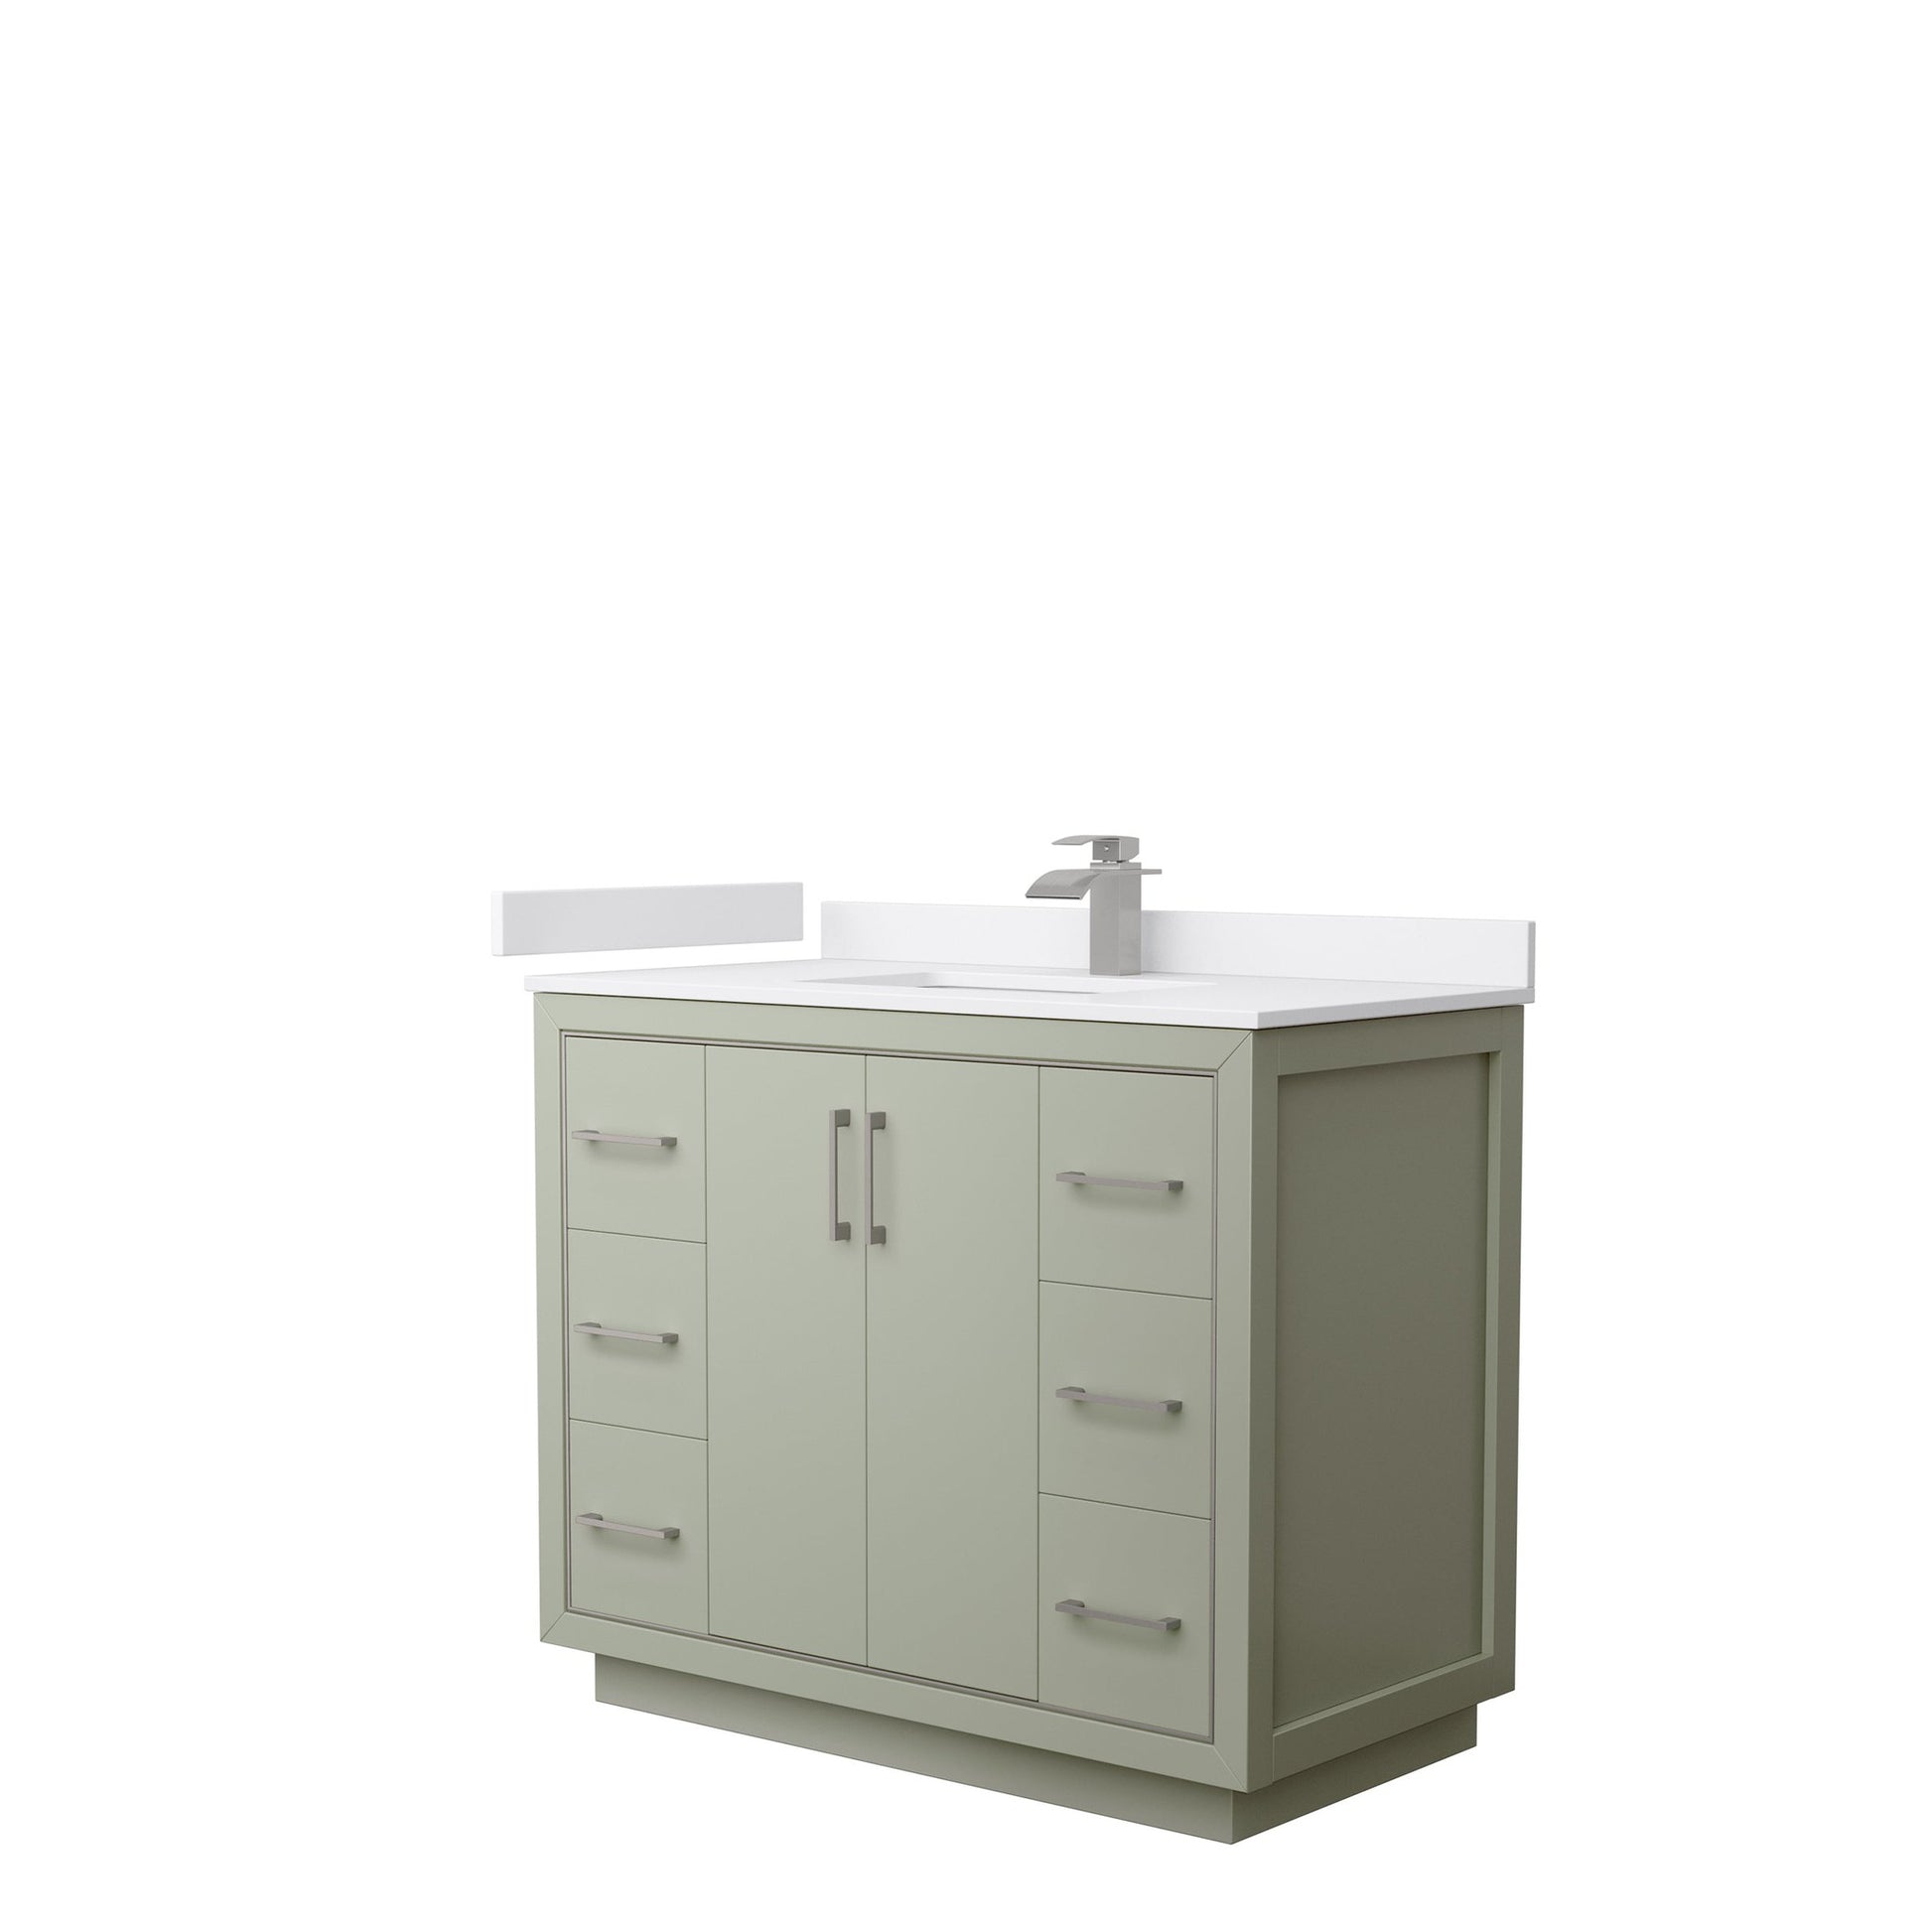 Wyndham Collection Icon 42" Single Bathroom Vanity in Light Green, White Cultured Marble Countertop, Undermount Square Sink, Brushed Nickel Trim